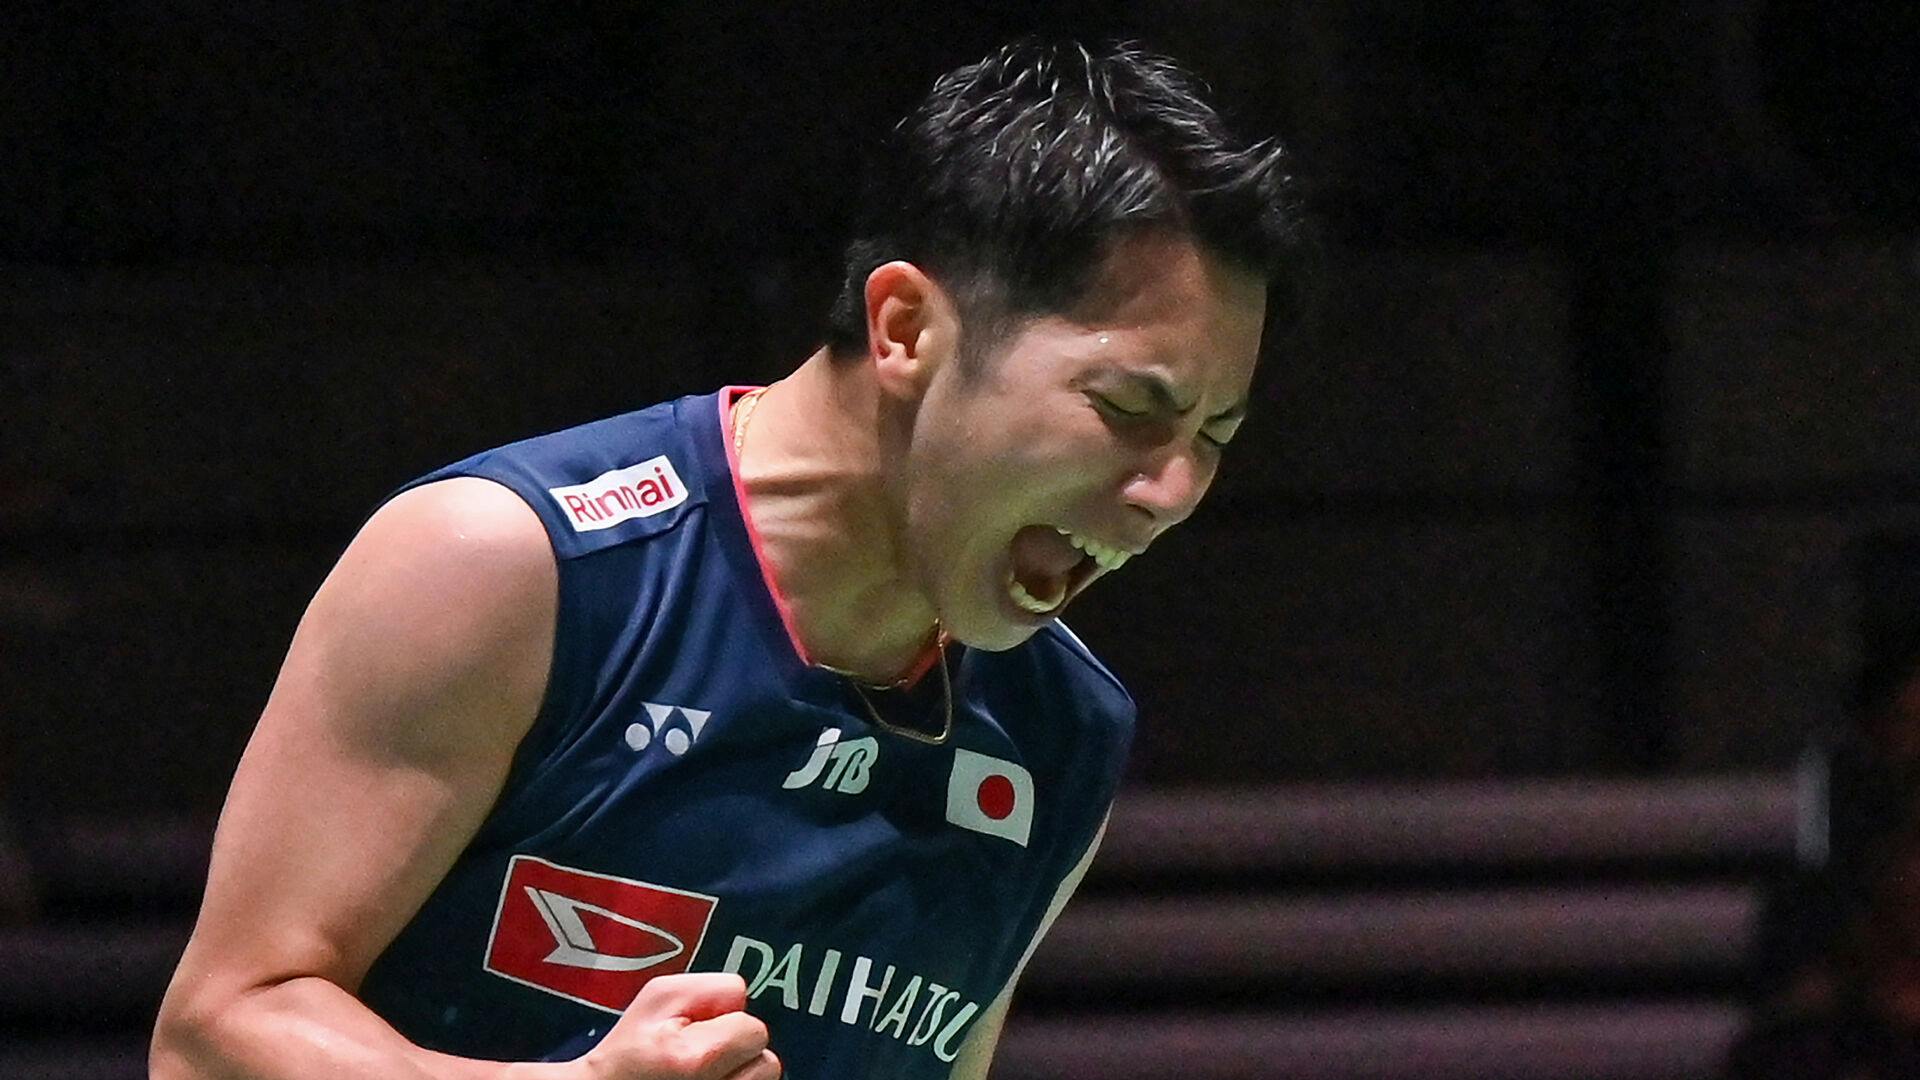 Koki Watanabe of Japan celebrates winning match point against Kento Momota of Japan during their men's singles match on the second day of the Japan Open badminton tournament in Tokyo on July 26, 2023. Richard A. Brooks / AFP